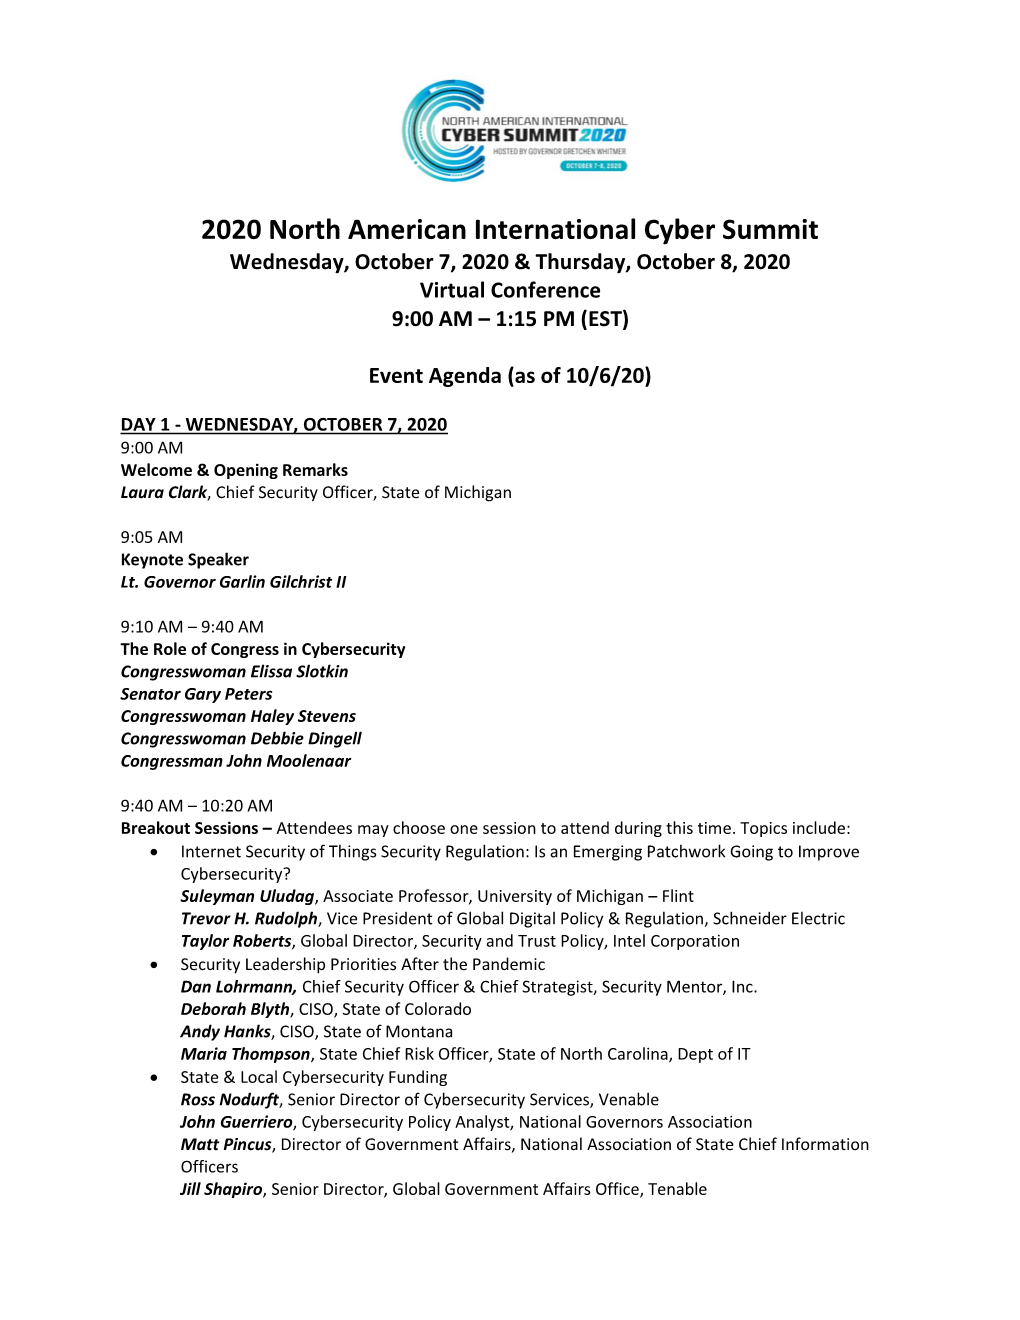 2020 North American International Cyber Summit Wednesday, October 7, 2020 & Thursday, October 8, 2020 Virtual Conference 9:00 AM – 1:15 PM (EST)